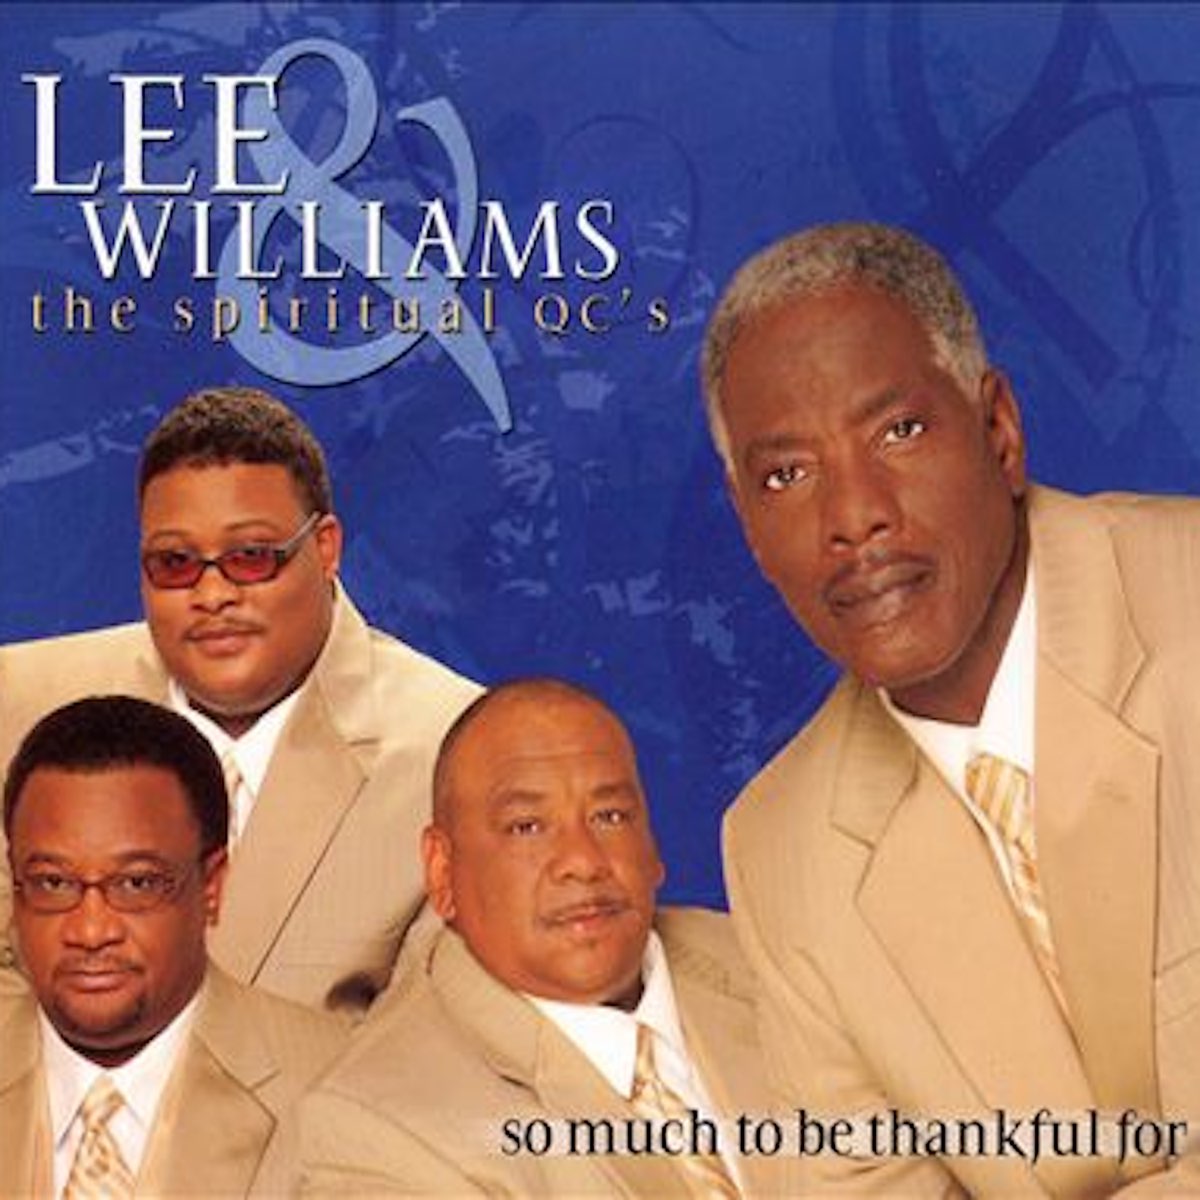 So Much to Be Thankful For by Lee Williams & The Spiritual QC's on Apple  Music